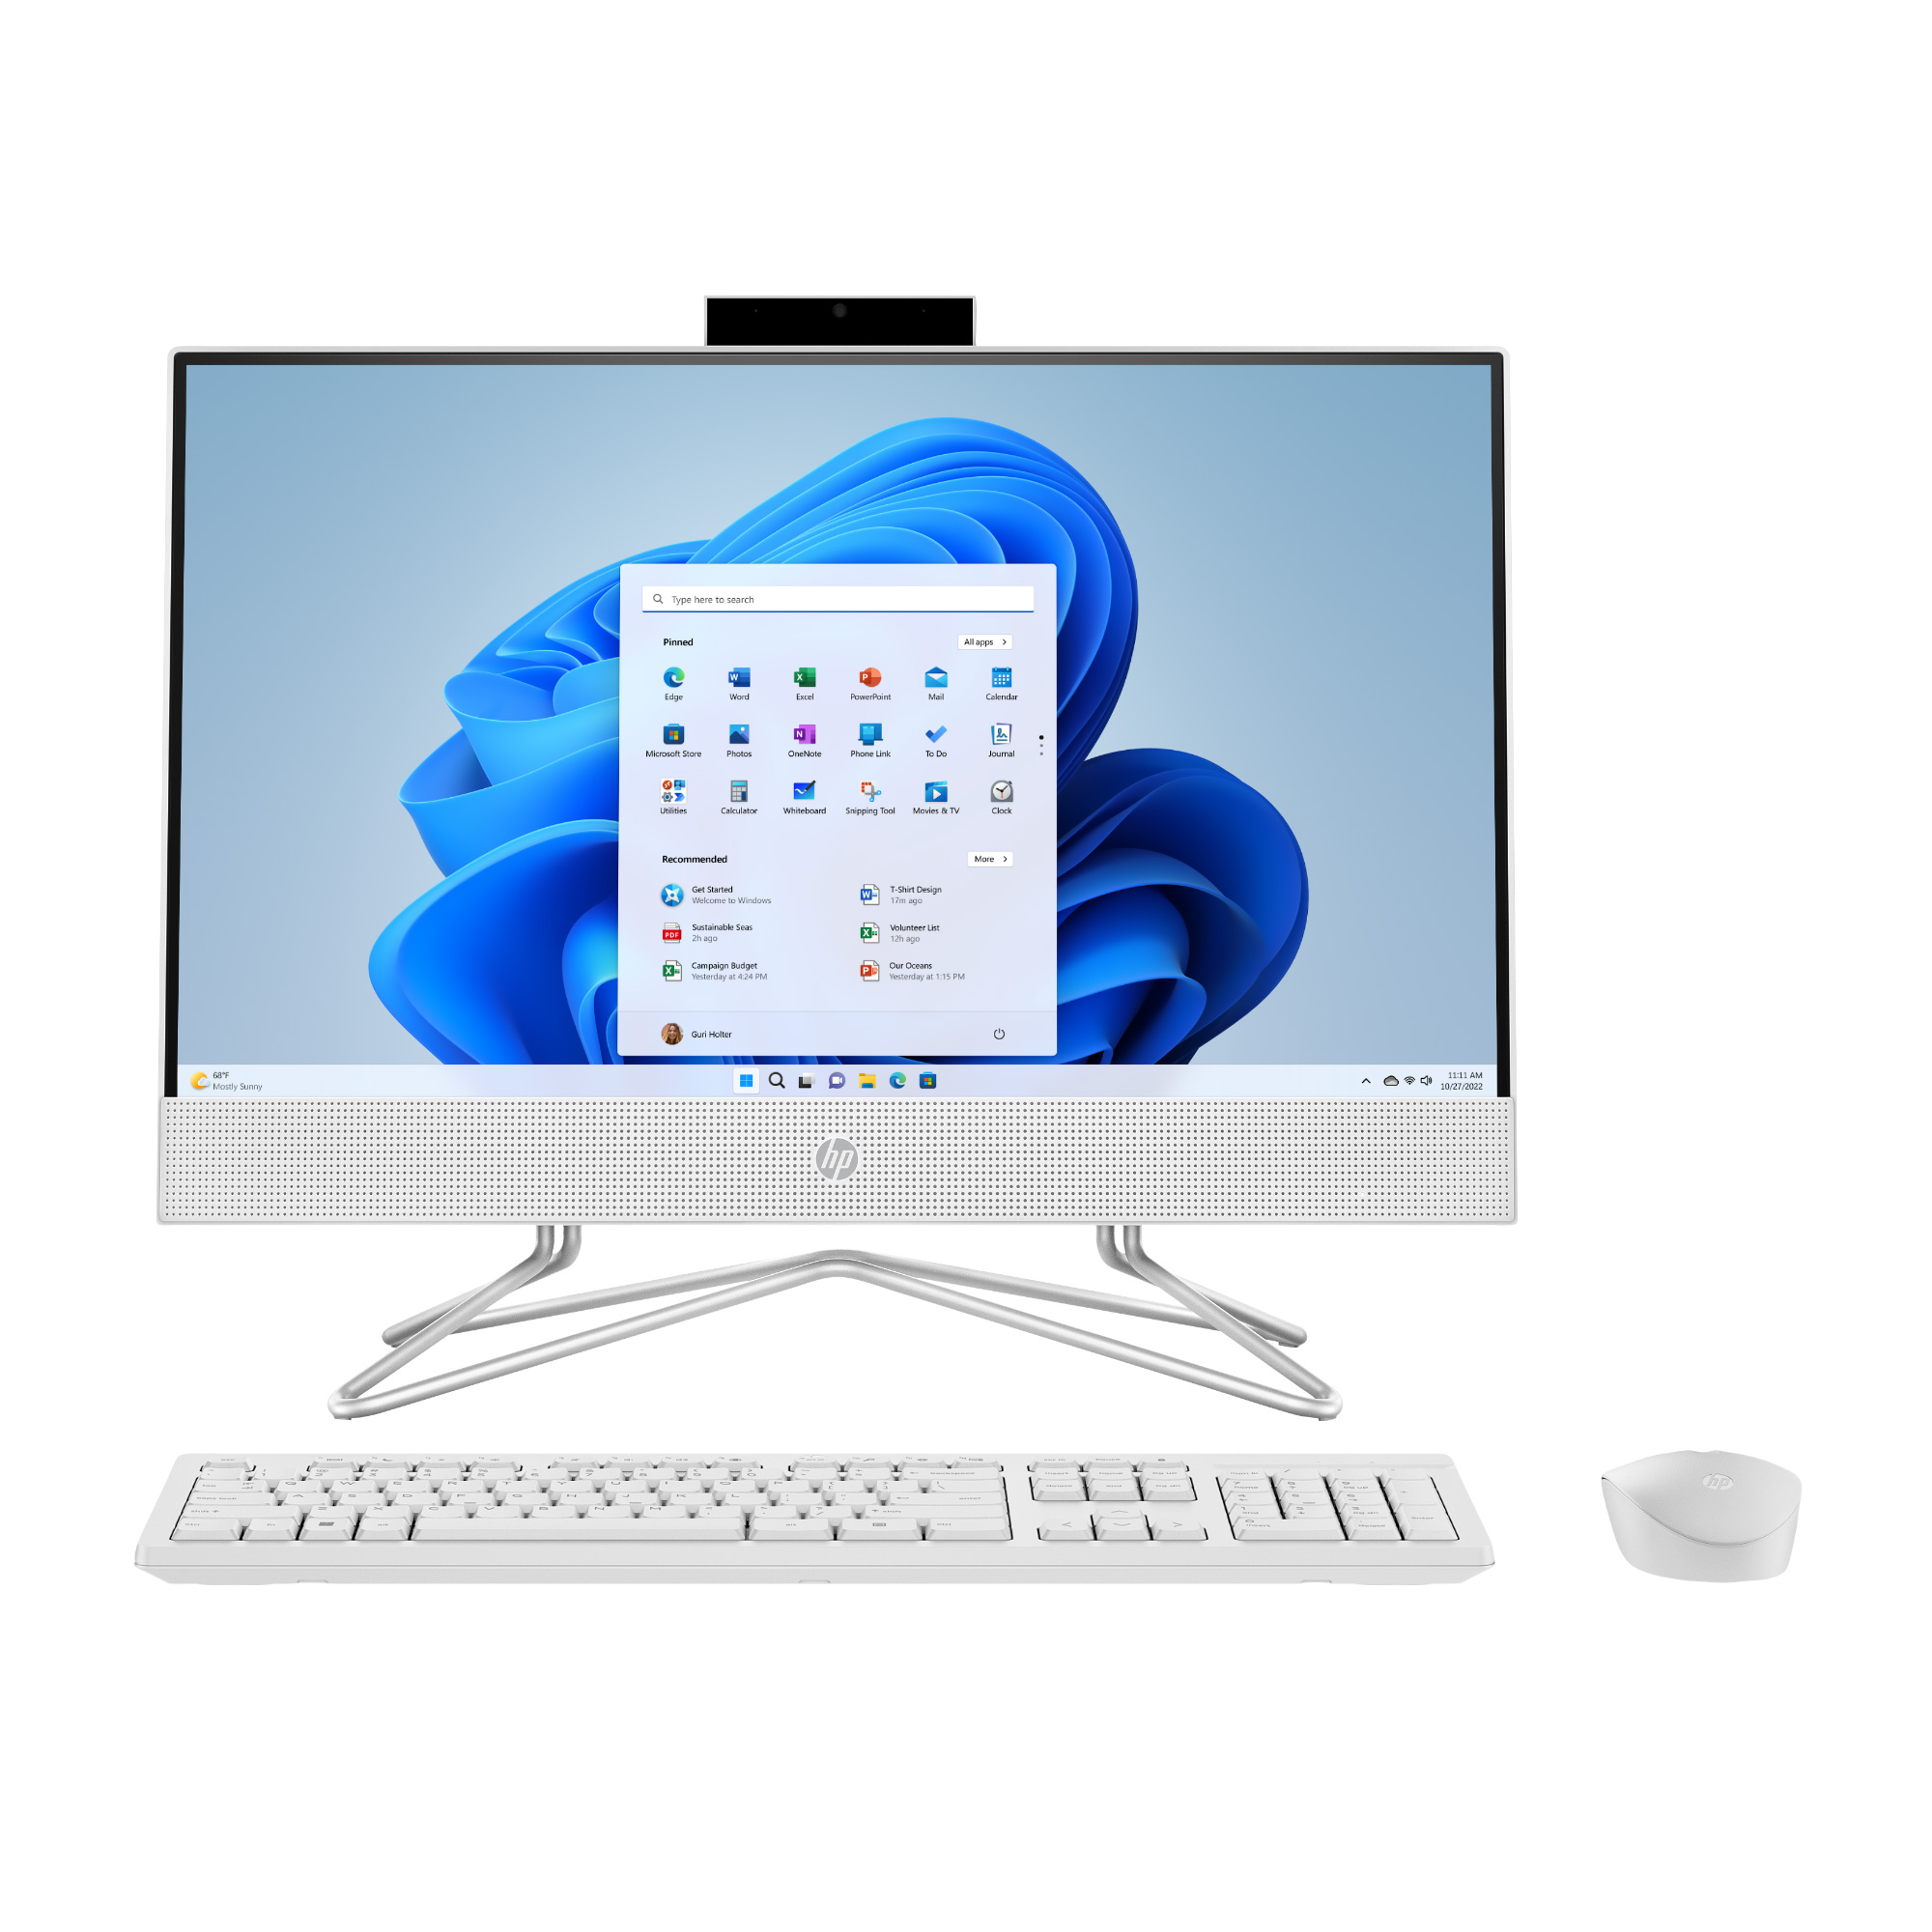 HP 21.5" All-in-One PC, Intel Pentium, 8GB Memory, 128GB SSD, Windows 11 Home S mode, White, 22-dd0143w - image 1 of 11